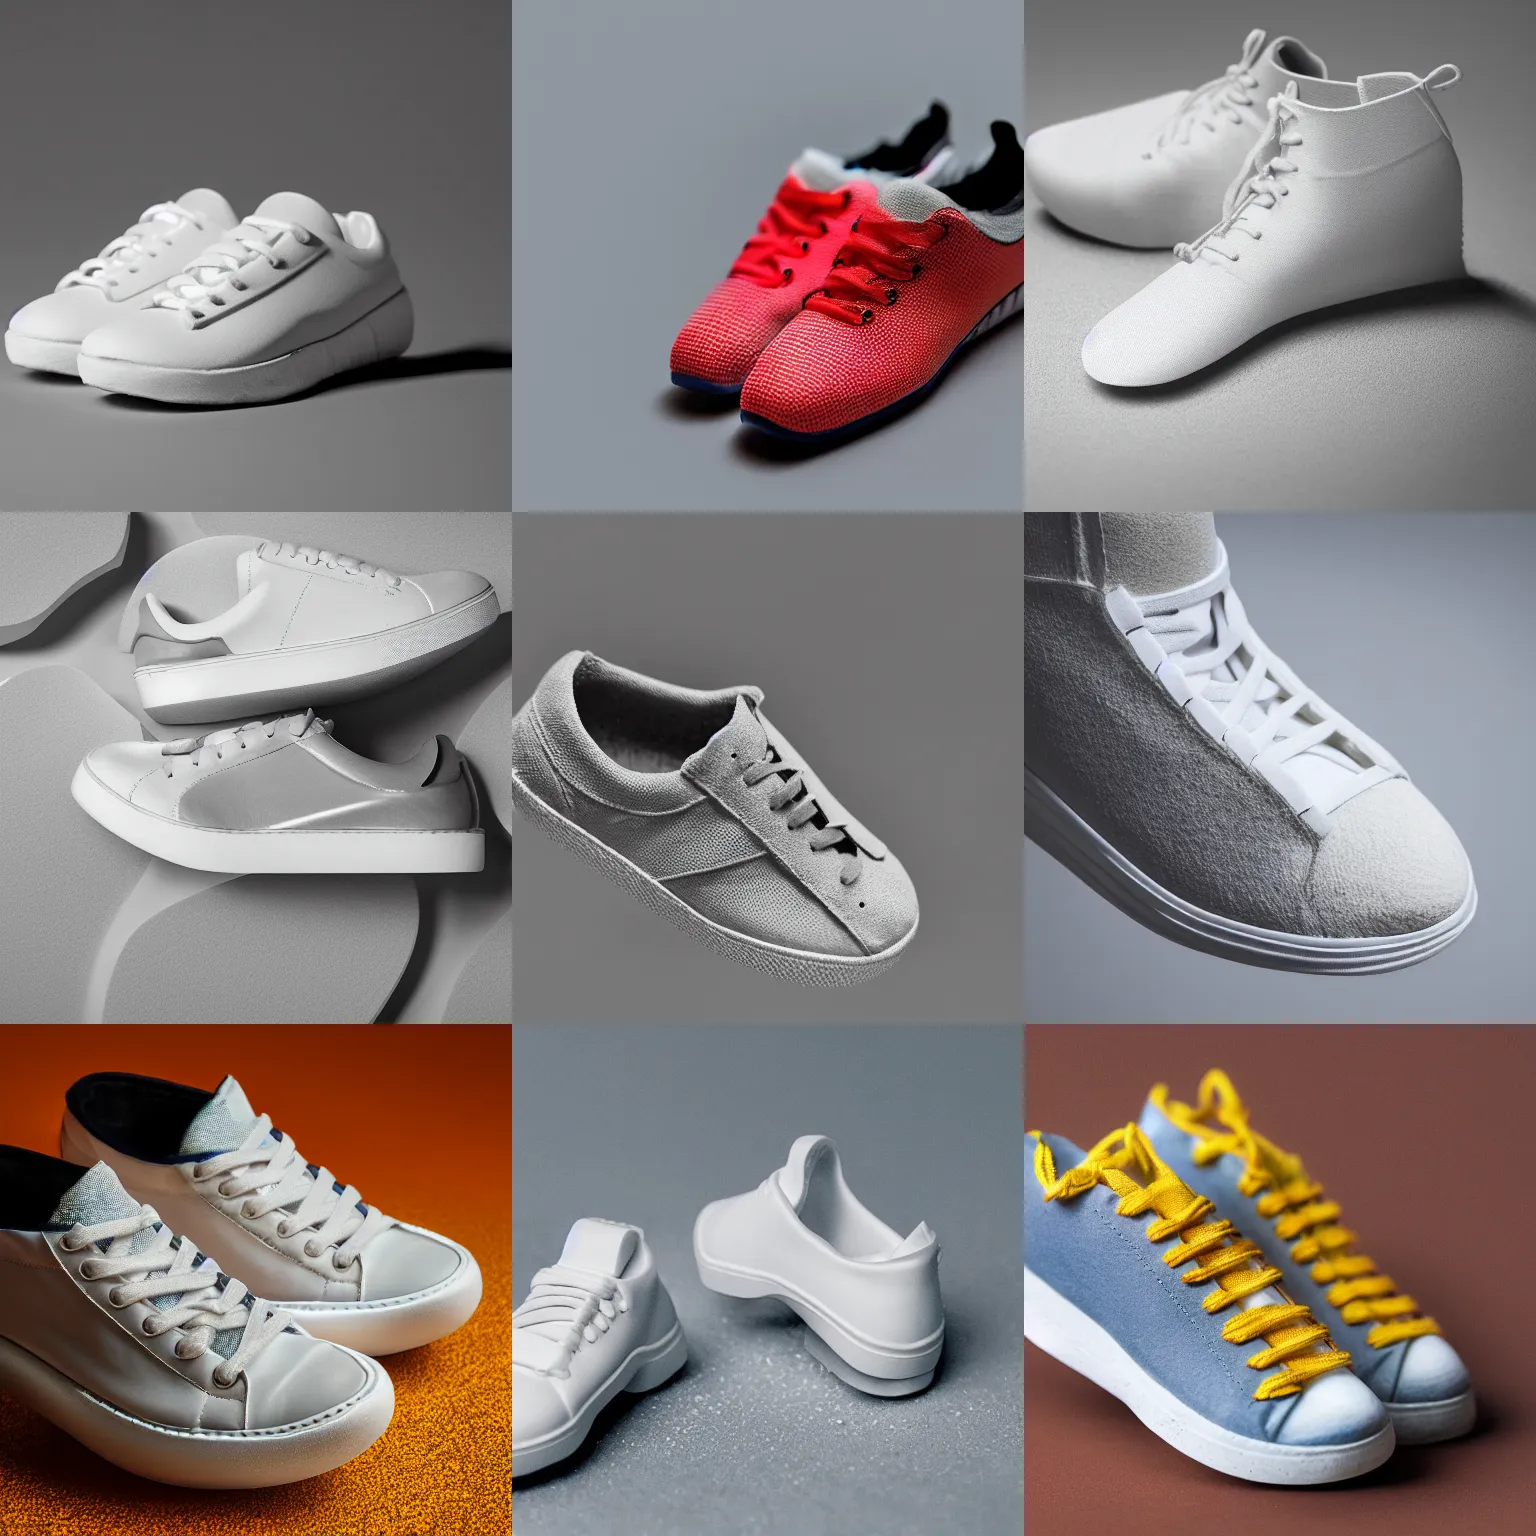 sneaker made out of styrofoam, product studio shot, | Stable Diffusion ...